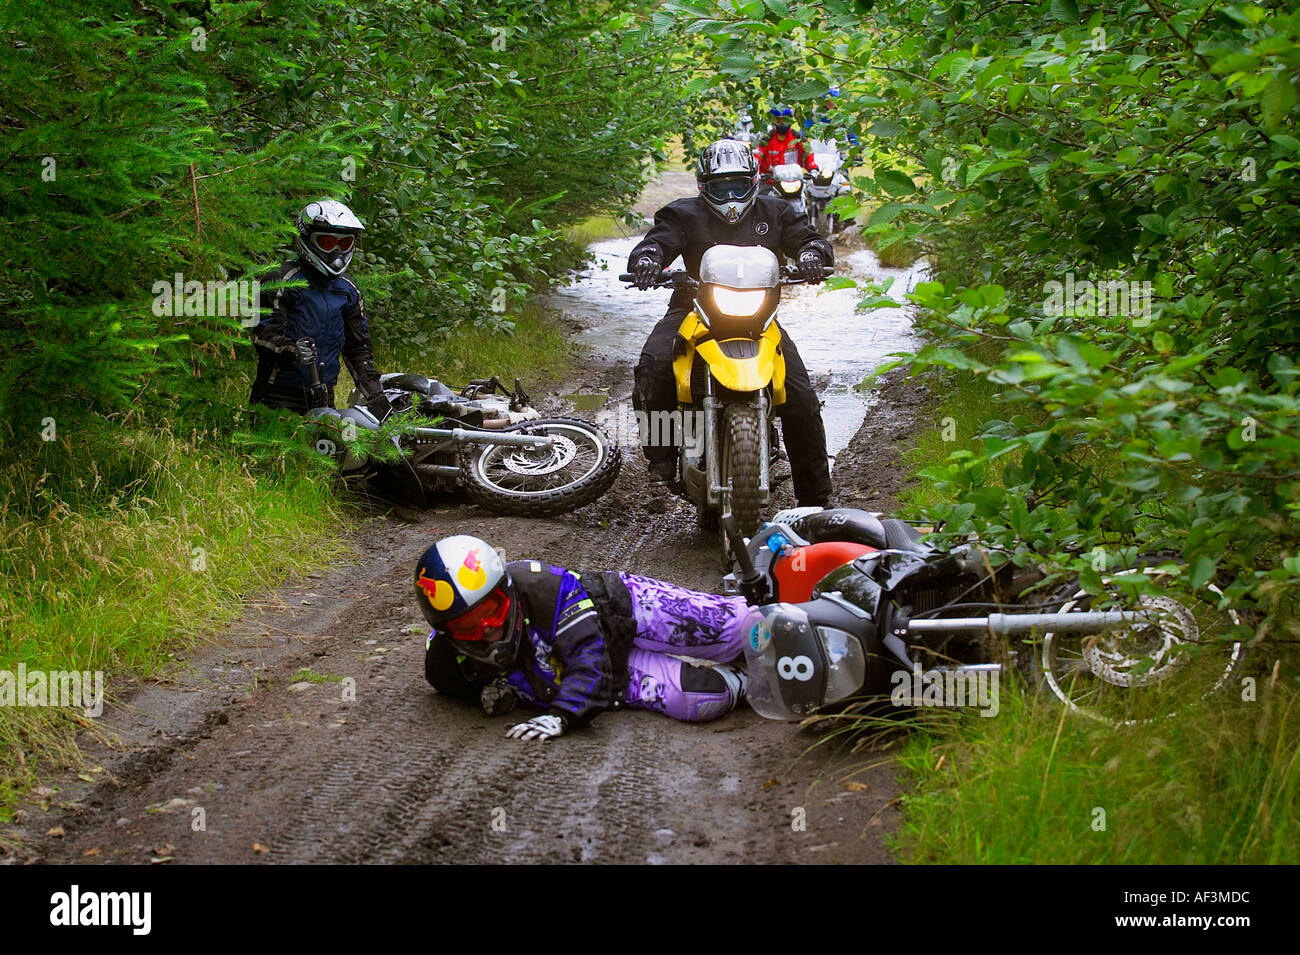 Off-road motorcycling Stock Photo